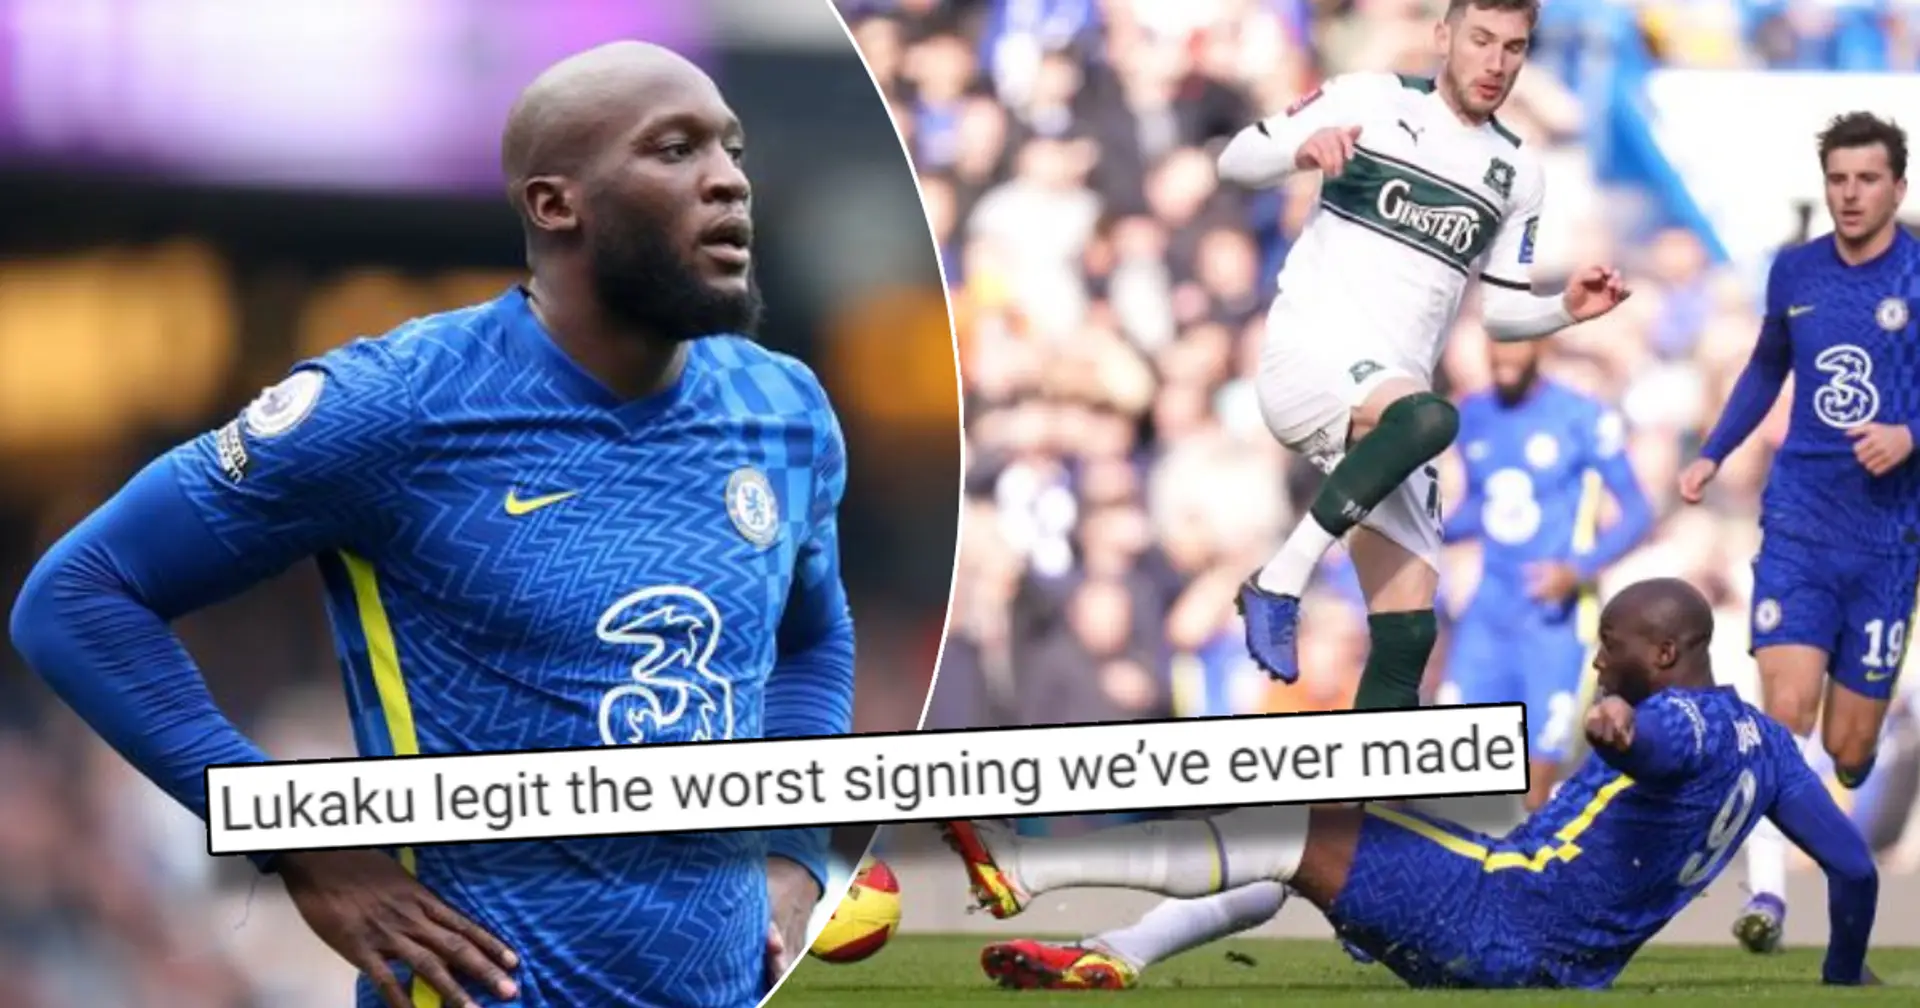 'He’s just a** and a waste of £100m': Even Chelsea fans call Romelu Lukaku 'worst signing' 